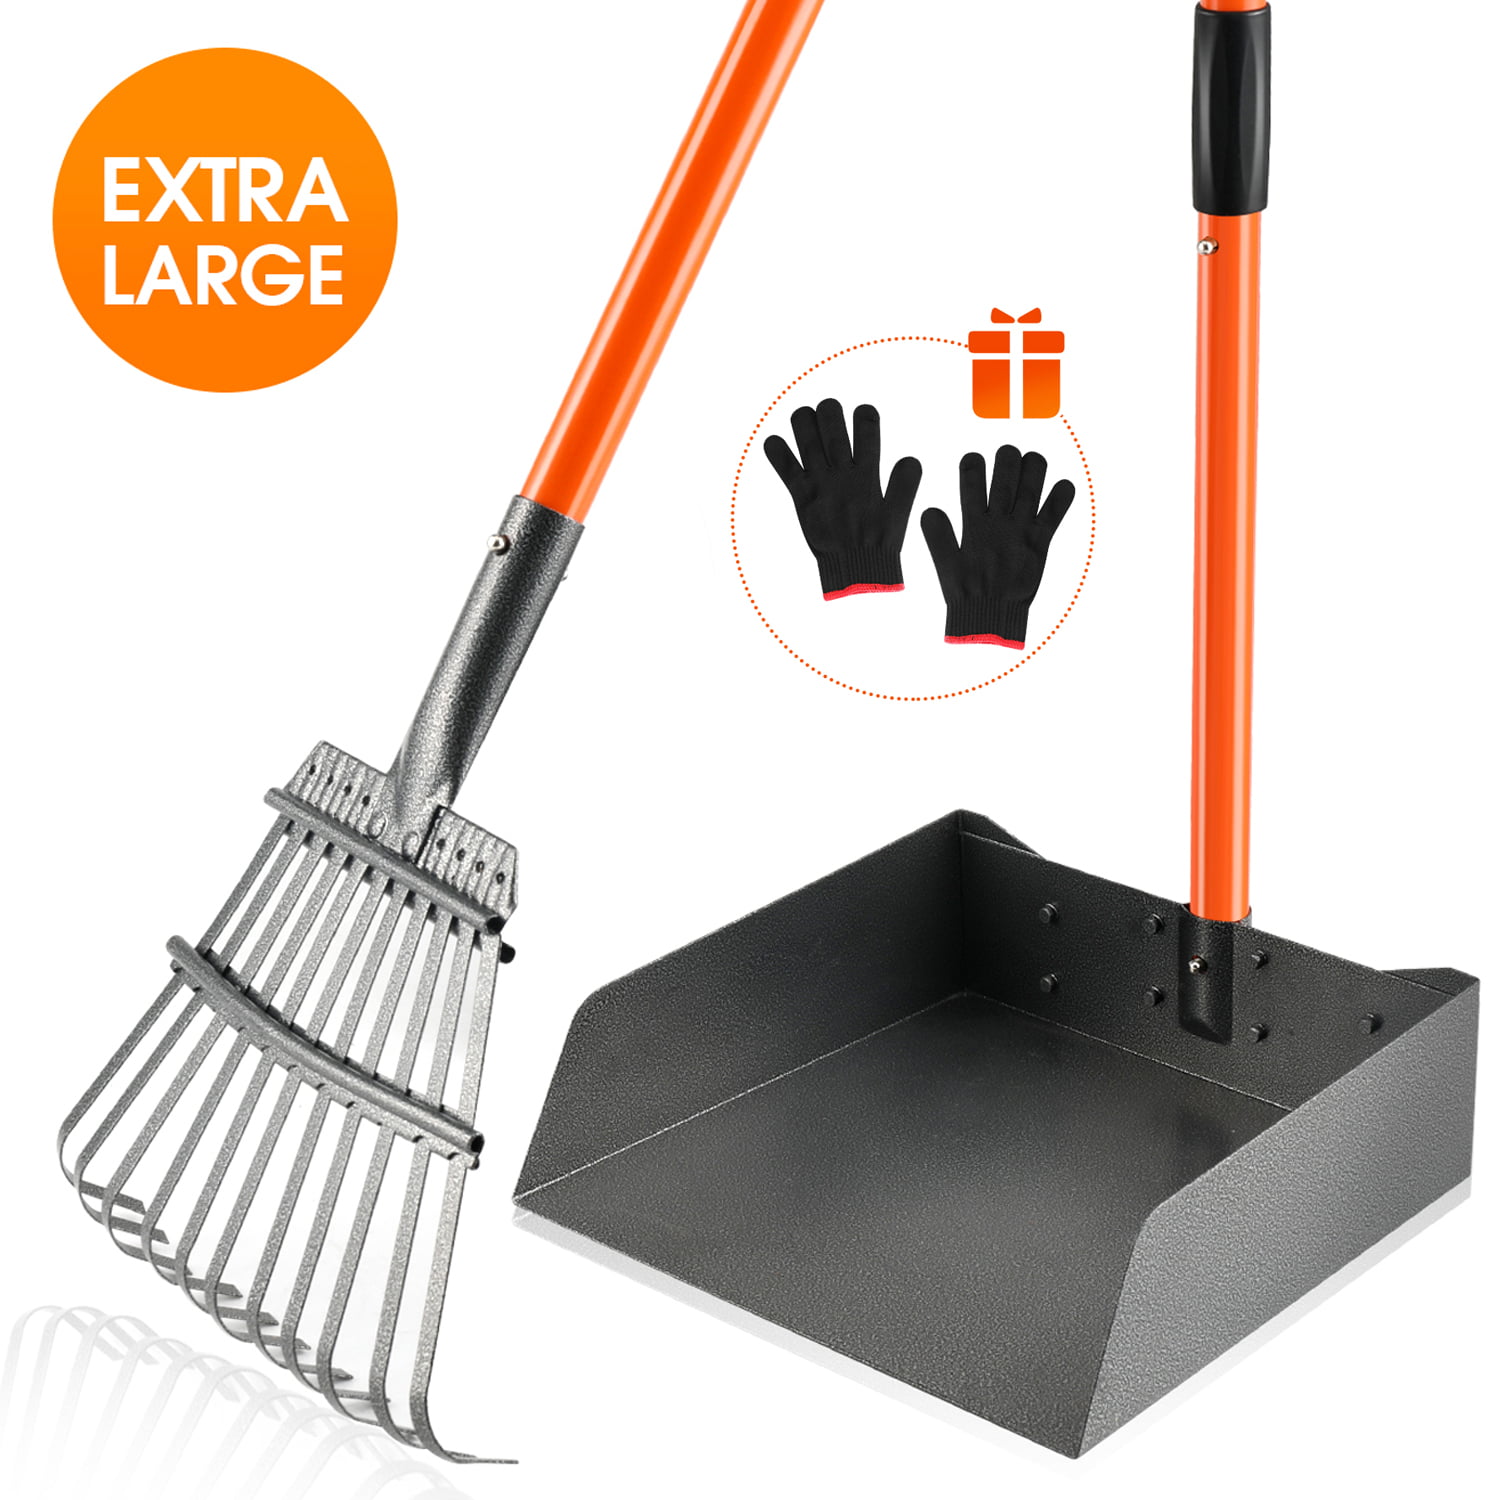 Lawns Rake and Spade，Great for Grass Extra Large Adjustable Long Handle Pooper Scooper for Large Dogs Dirt Gravel HITKYC Dog Pooper Scooper 3 PCS Pet Waste Removal Poop Scooper with Metal Tray 